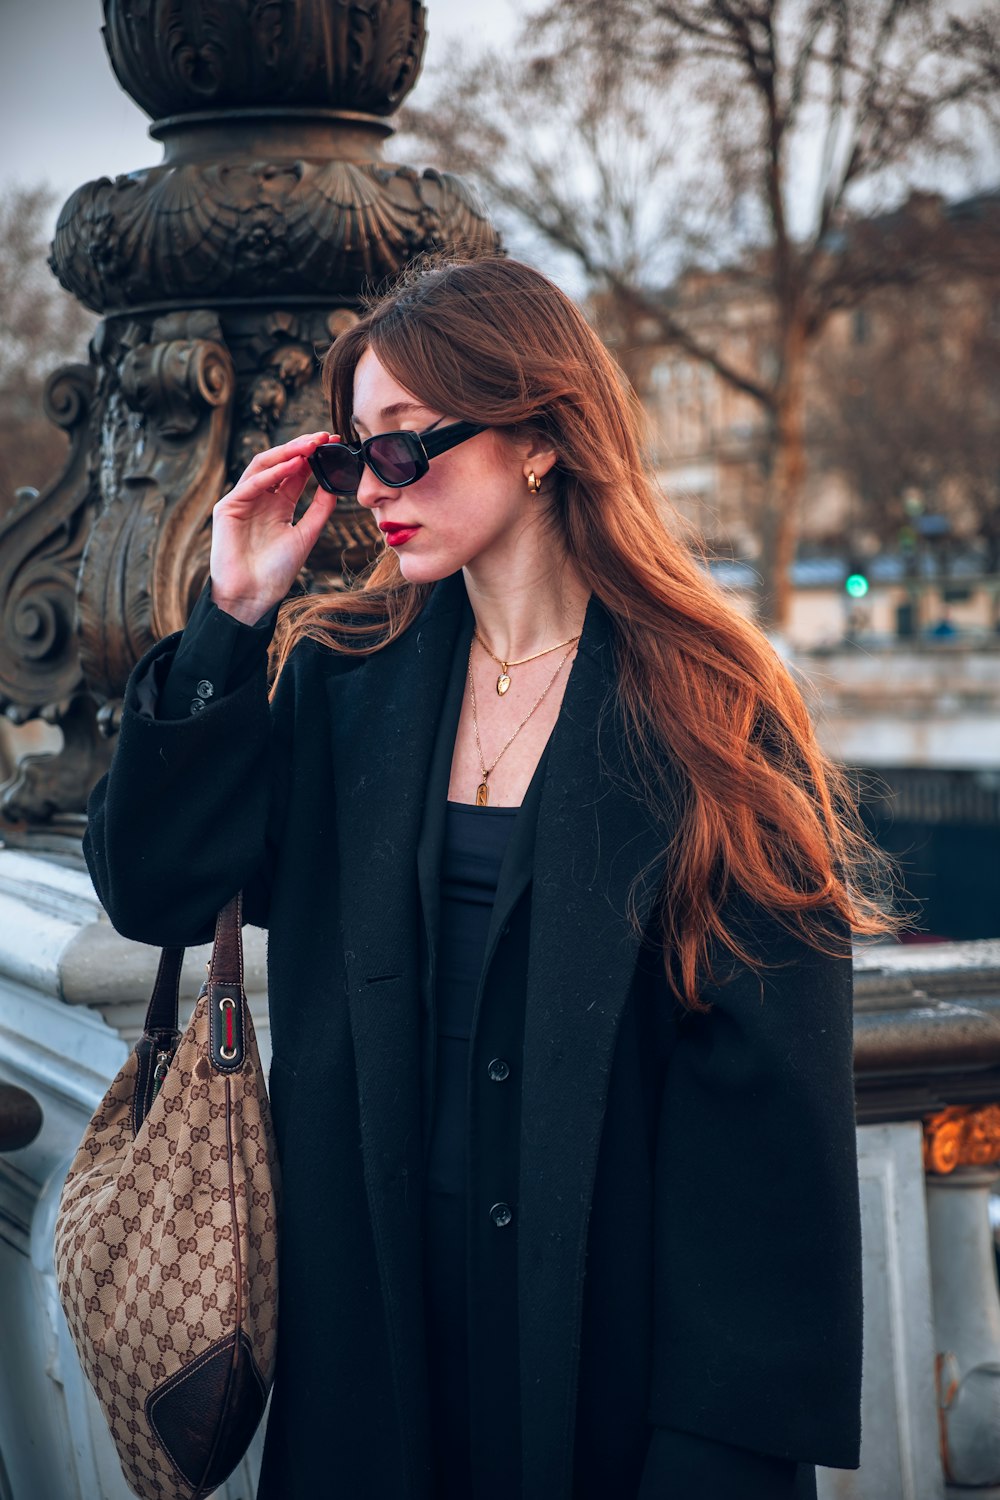 a woman in a black coat and sunglasses